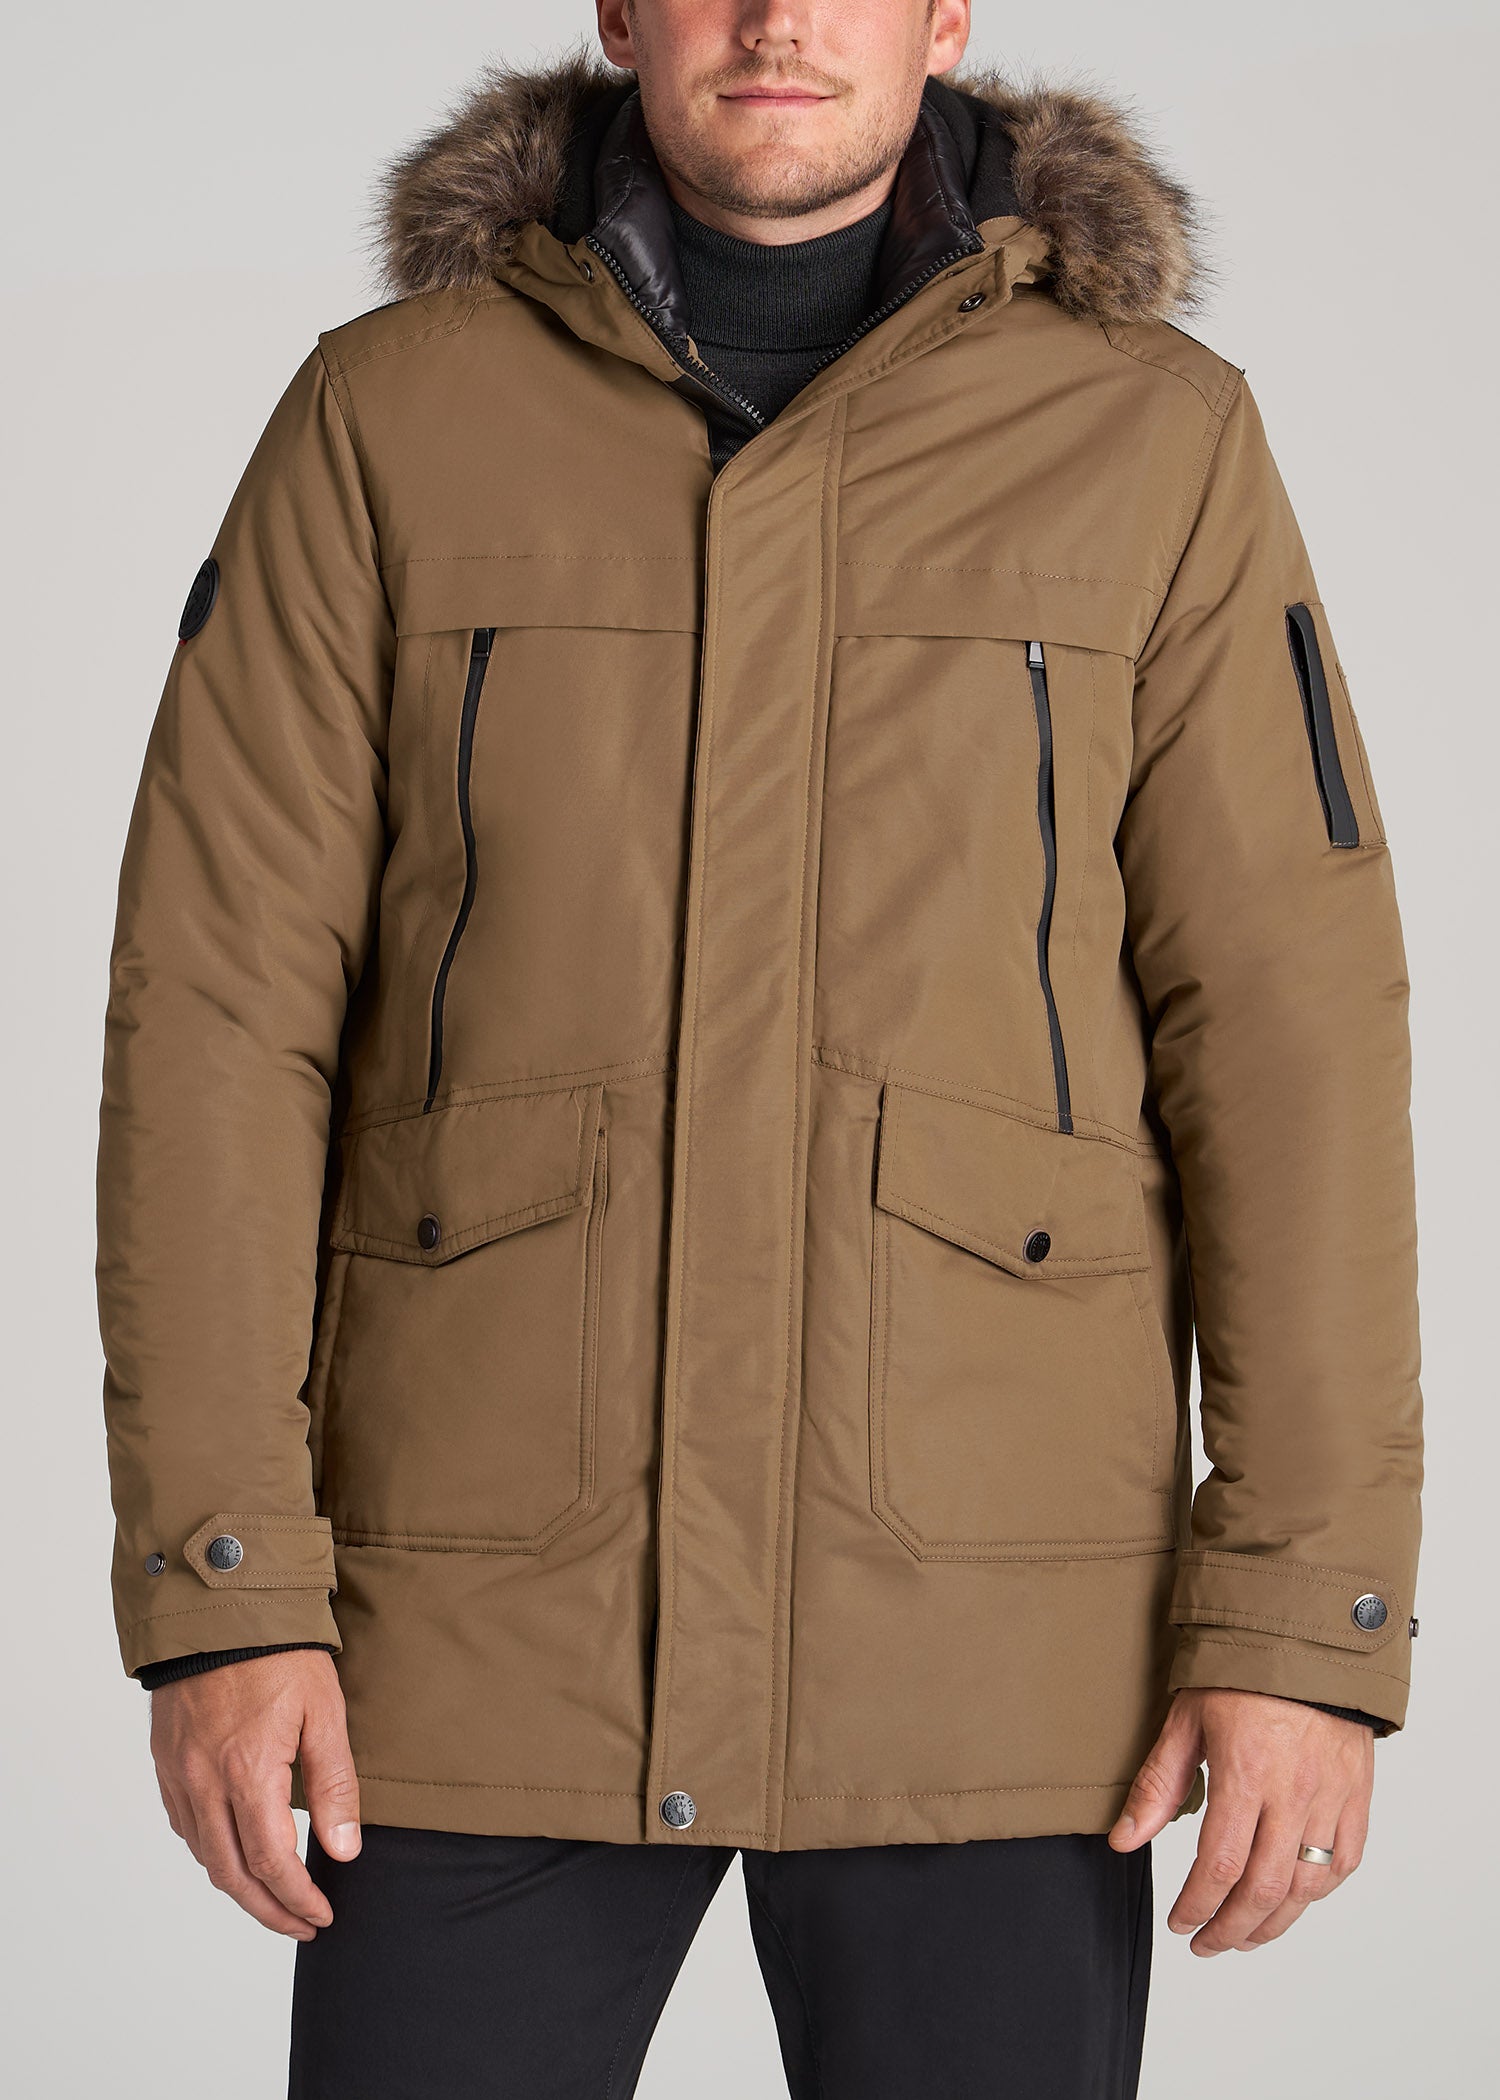 Superdry  Mens winter fashion, Mens outfits, Snow outfit men